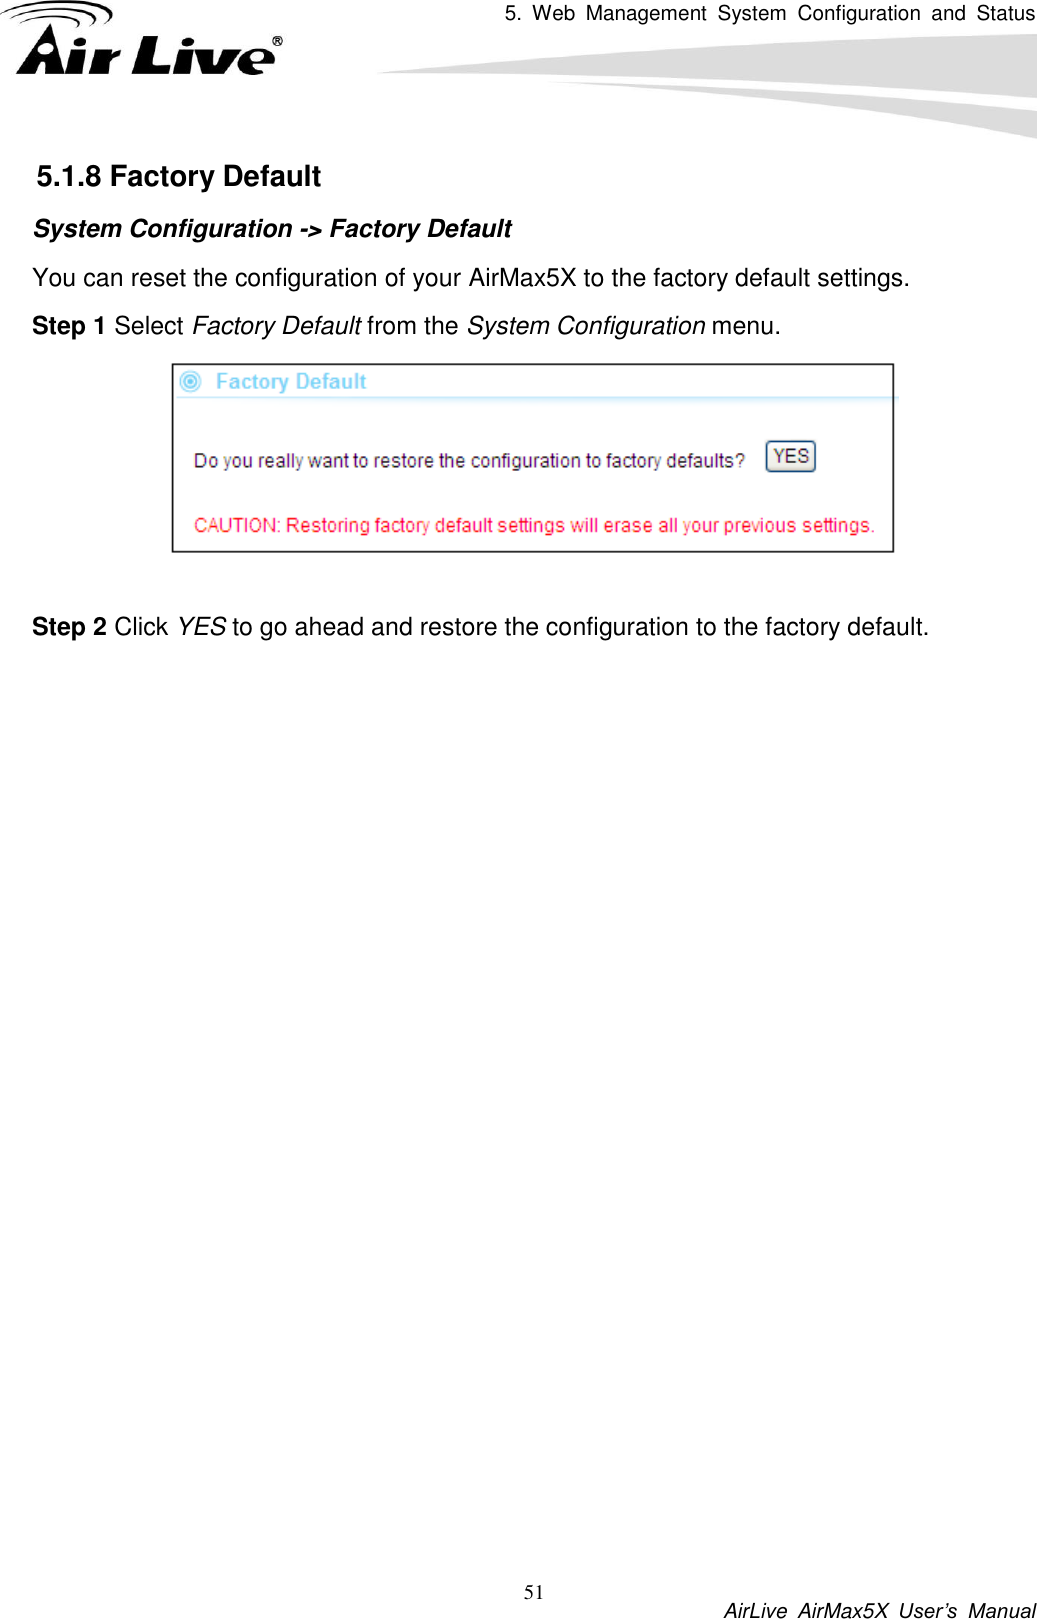 5.  Web  Management  System  Configuration  and  Status           AirLive  AirMax5X  User’s  Manual 51 5.1.8 Factory Default System Configuration -&gt; Factory Default You can reset the configuration of your AirMax5X to the factory default settings.   Step 1 Select Factory Default from the System Configuration menu.   Step 2 Click YES to go ahead and restore the configuration to the factory default. 